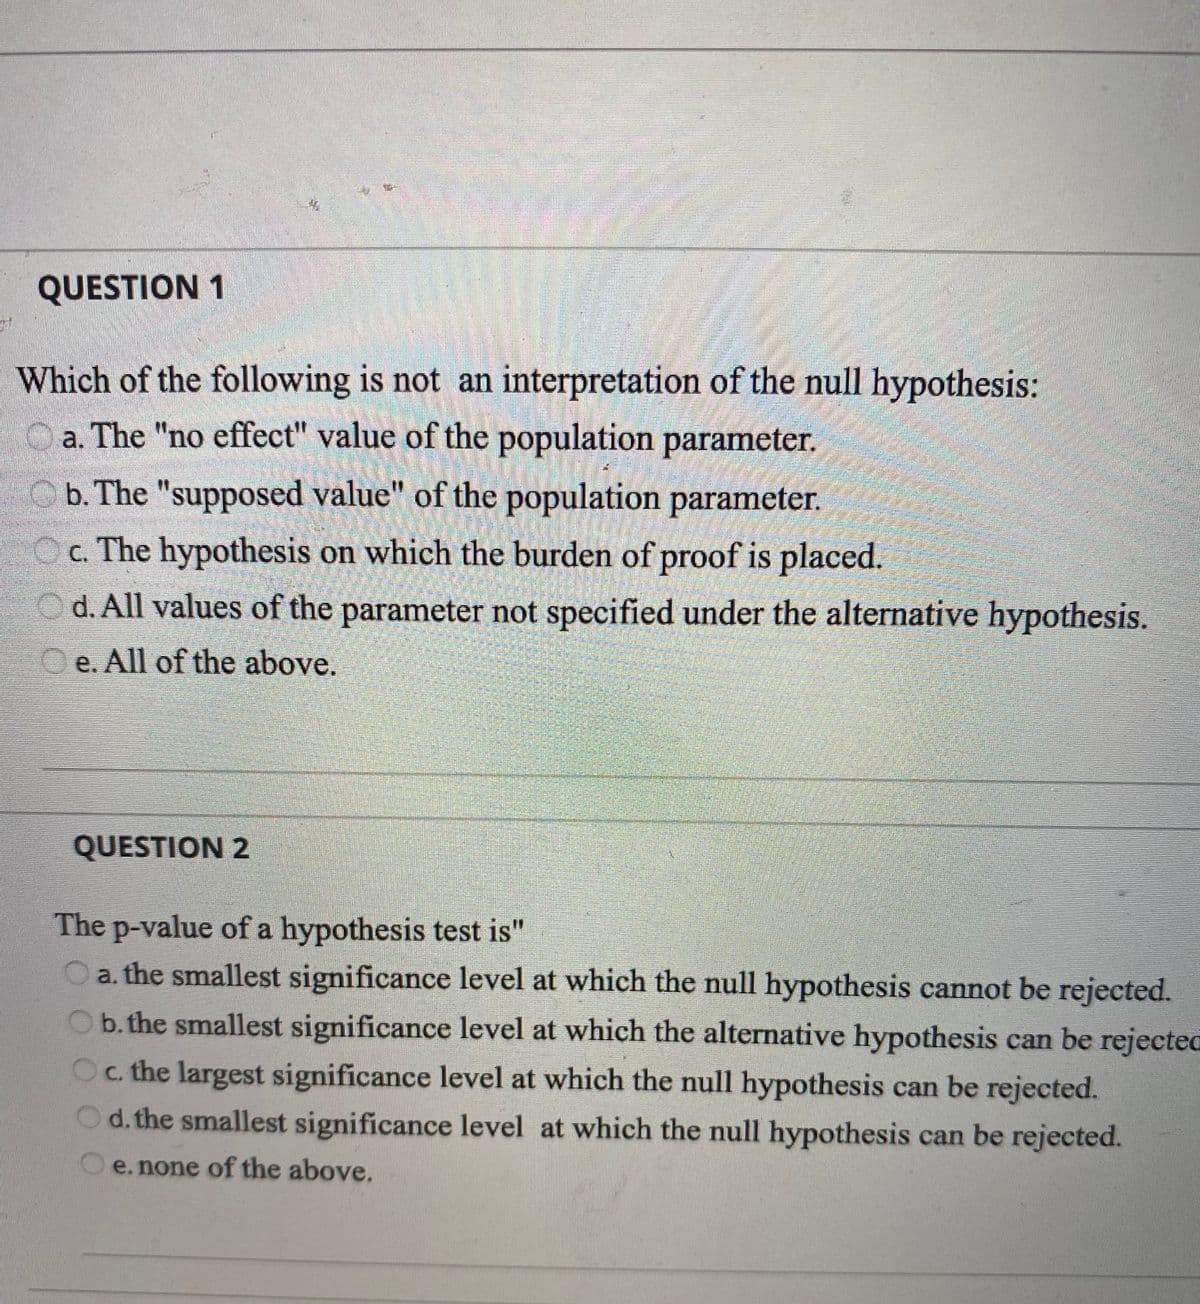 QUESTION 1
Which of the following is not an interpretation of the null hypothesis:
a. The "no effect" value of the population parameter.
Ob. The "supposed value" of the population parameter.
Oc. The hypothesis on which the burden of proof is placed.
d. All values of the parameter not specified under the alternative hypothesis.
e. All of the above.
QUESTION 2
The p-value of a hypothesis test is"
O a. the smallest significance level at which the null hypothesis cannot be rejected.
Ob. the smallest significance level at which the alternative hypothesis can be rejectec
Oc. the largest significance level at which the null hypothesis can be rejected.
Od. the smallest significance level at which the null hypothesis can be rejected.
e. none of the above.
